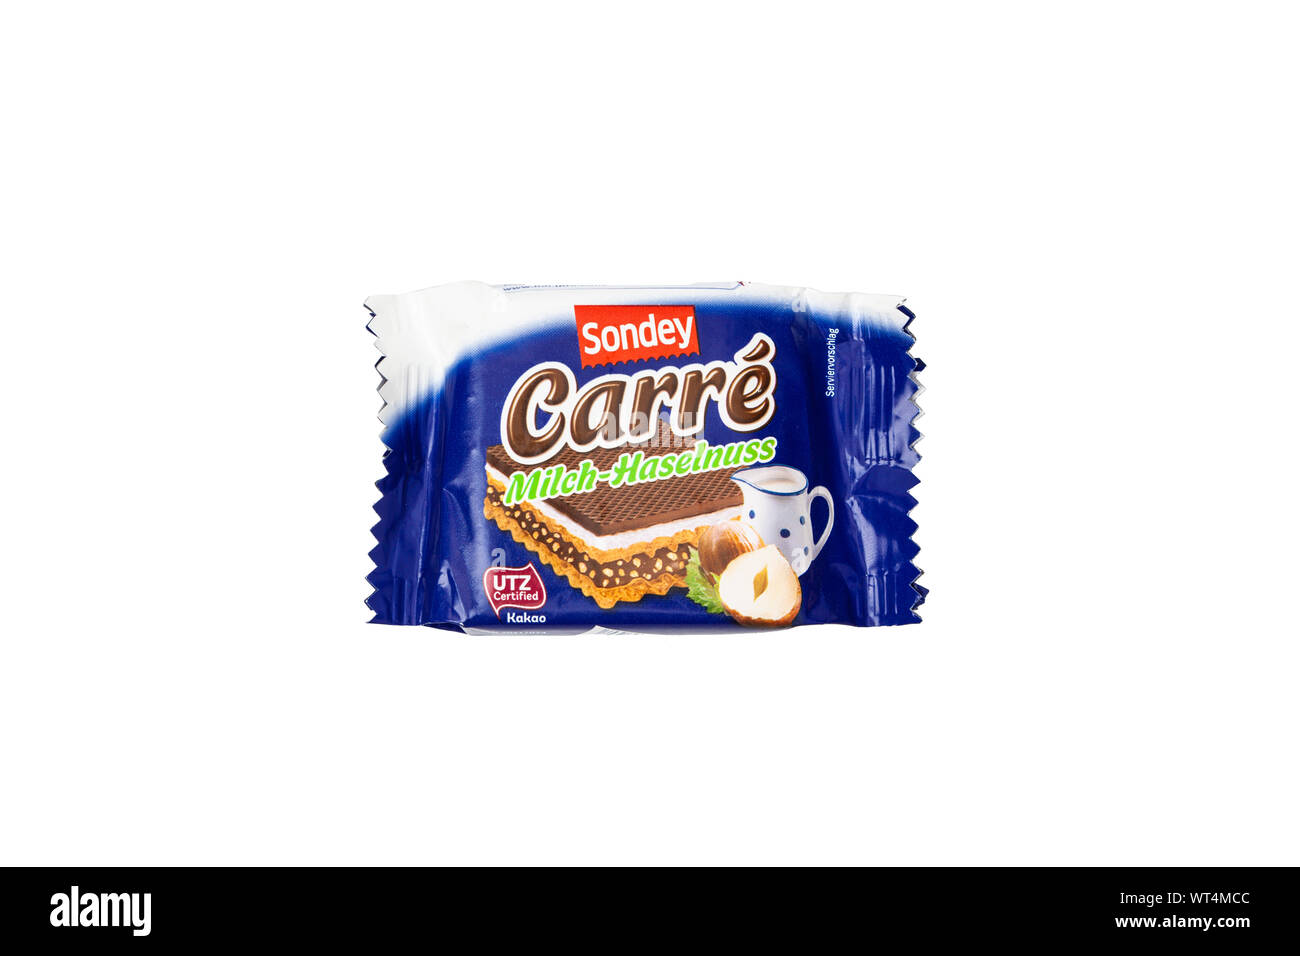 CHISINAU, MOLDOVA - September 9, 2019: SONDEY Carré Waffles milk-hazelnut.  Is a popular European manufacturer of sweets, desserts and cookies Stock  Photo - Alamy